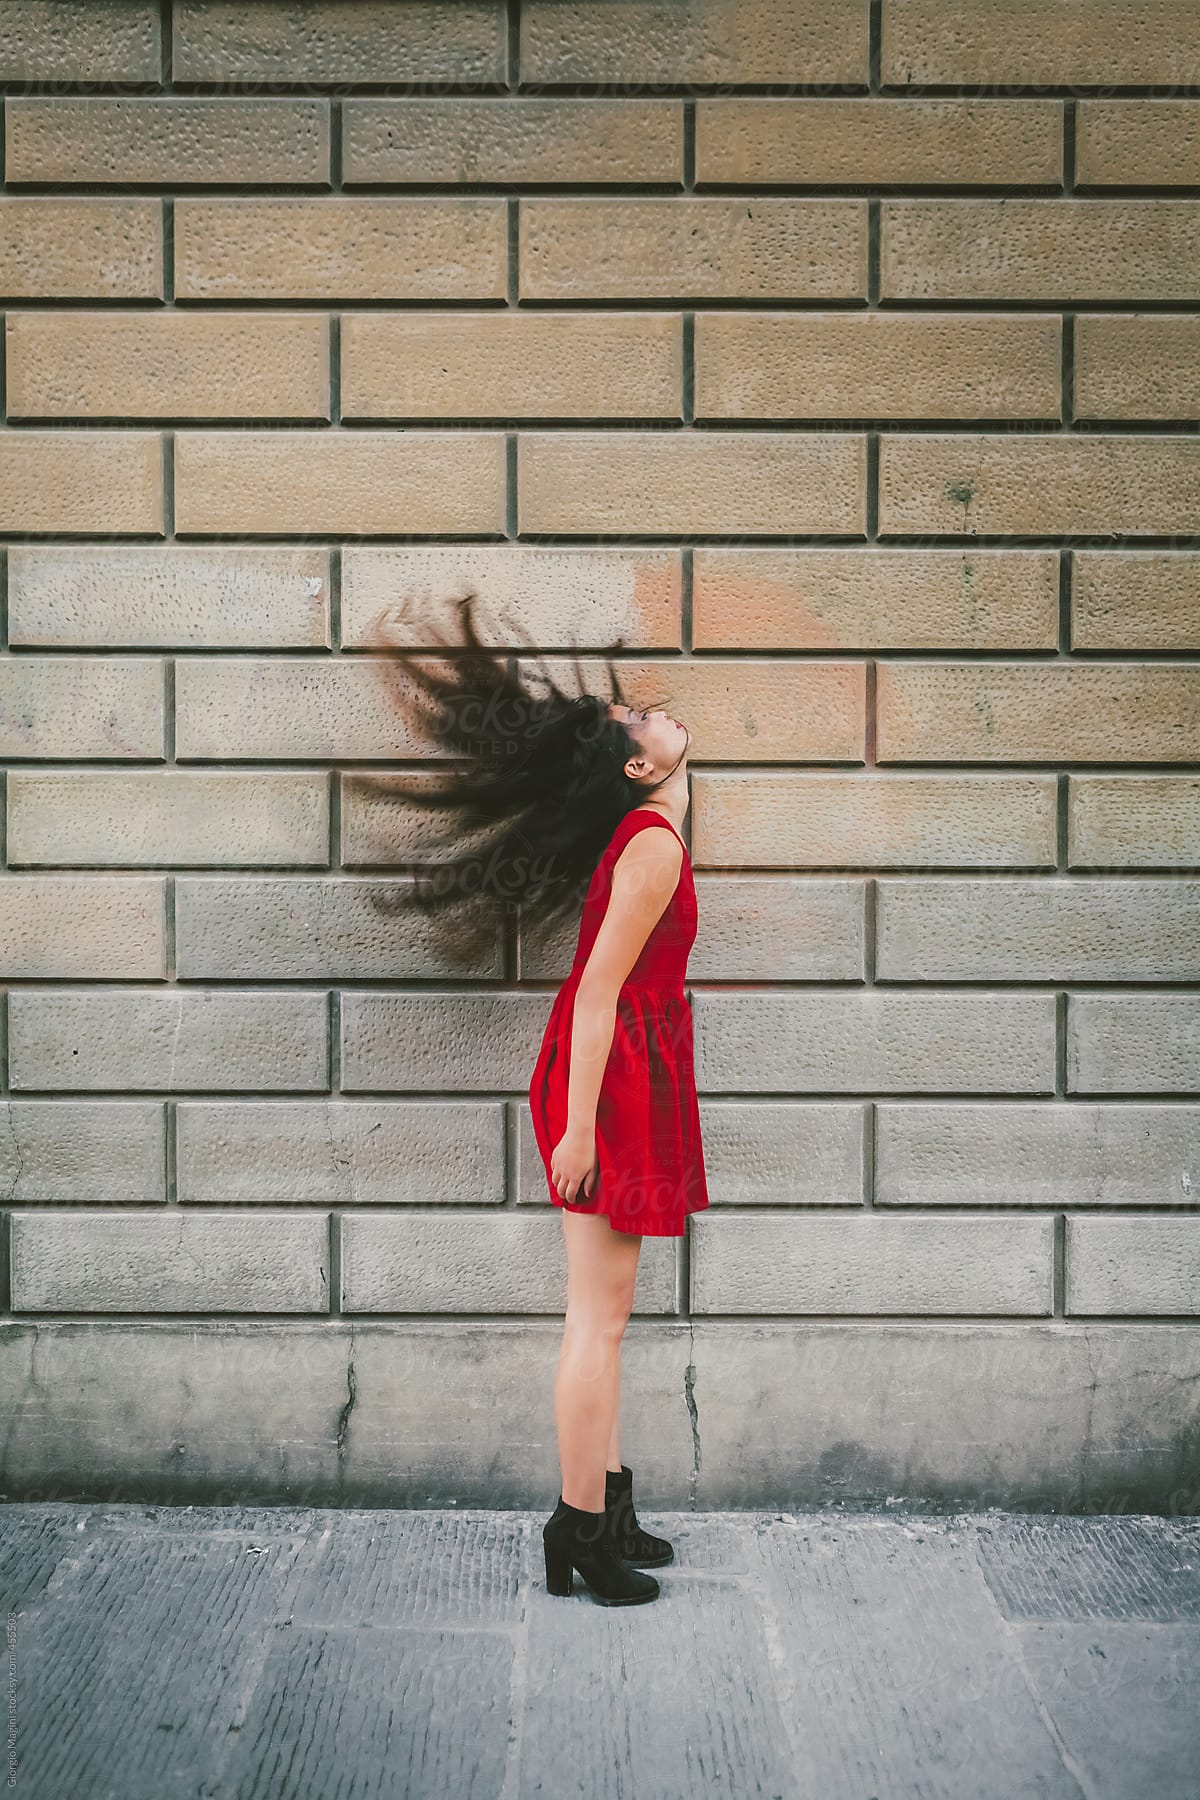 Asian Woman in Red Dress Flipping Her Hair